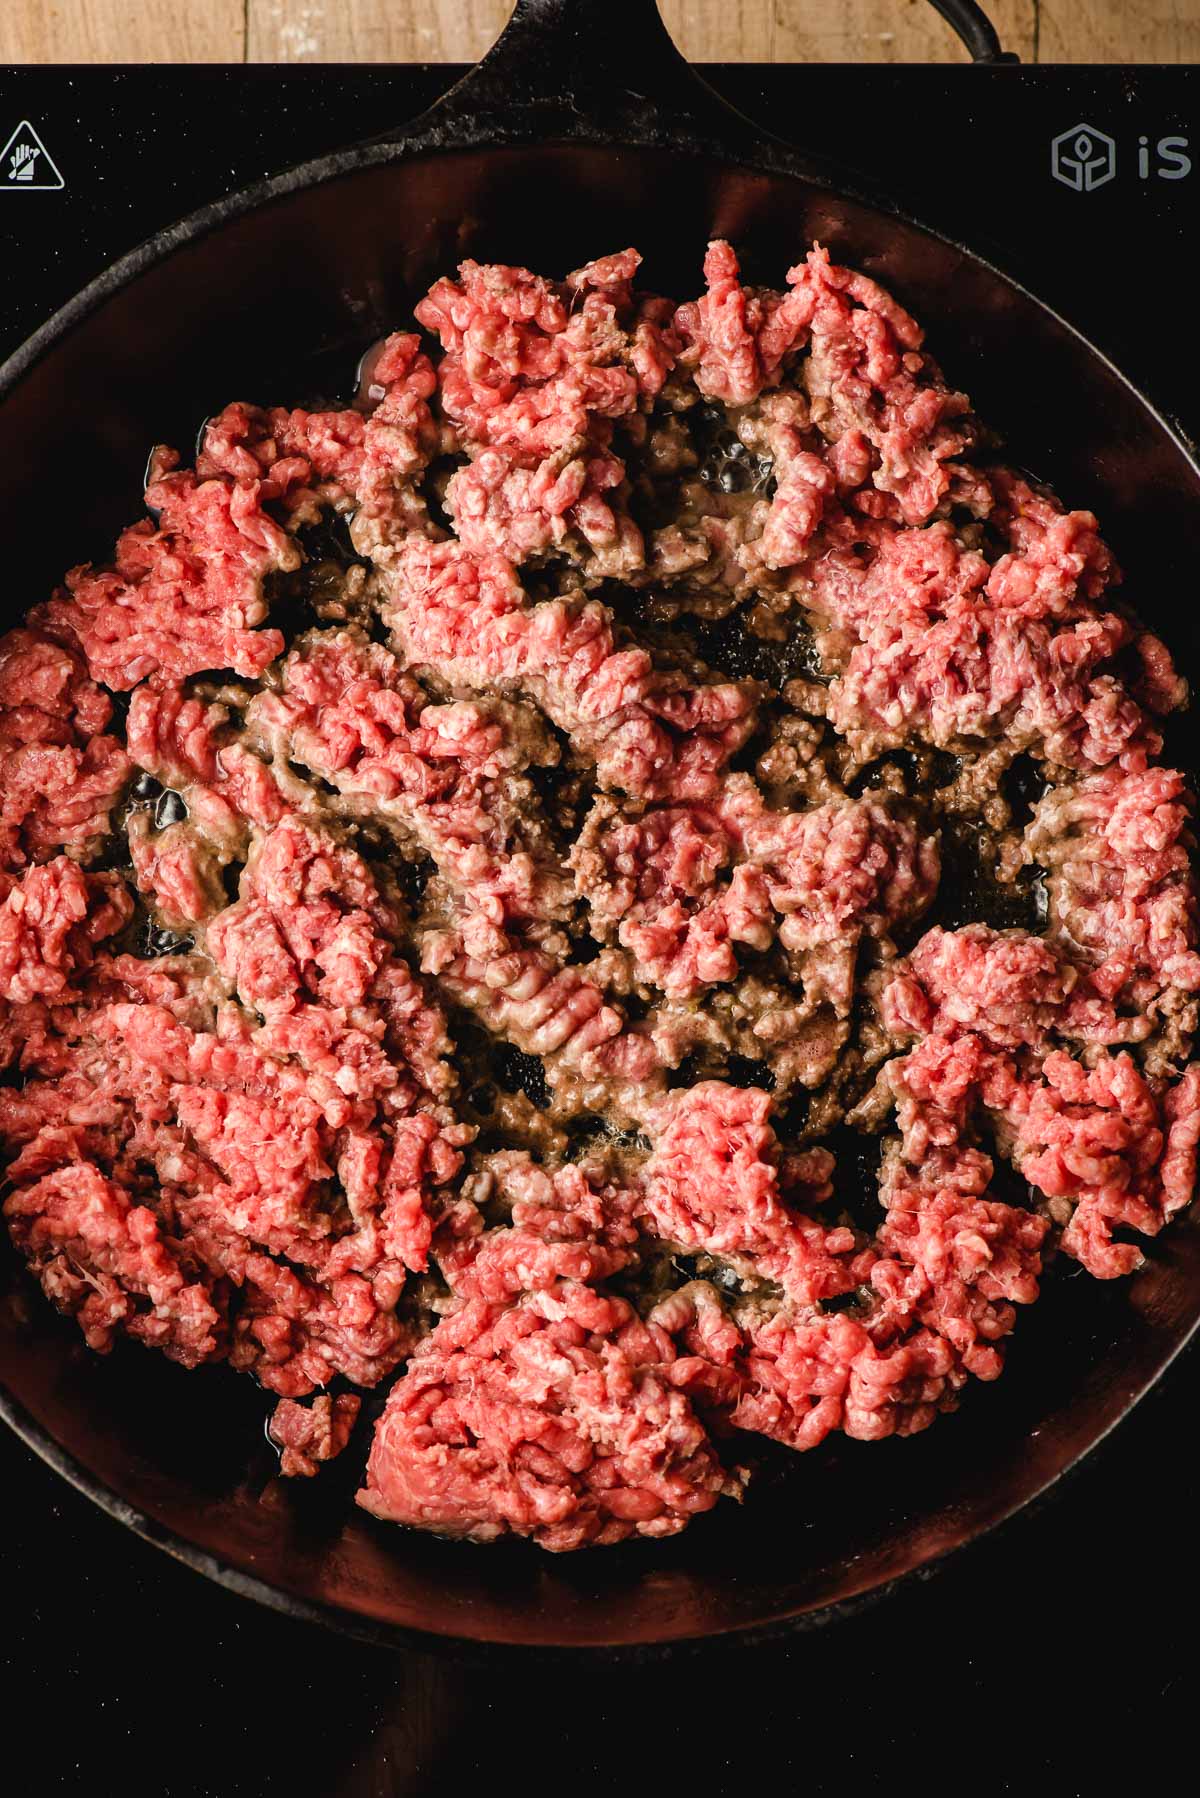 Ground beef browning in a cast iron skillet.